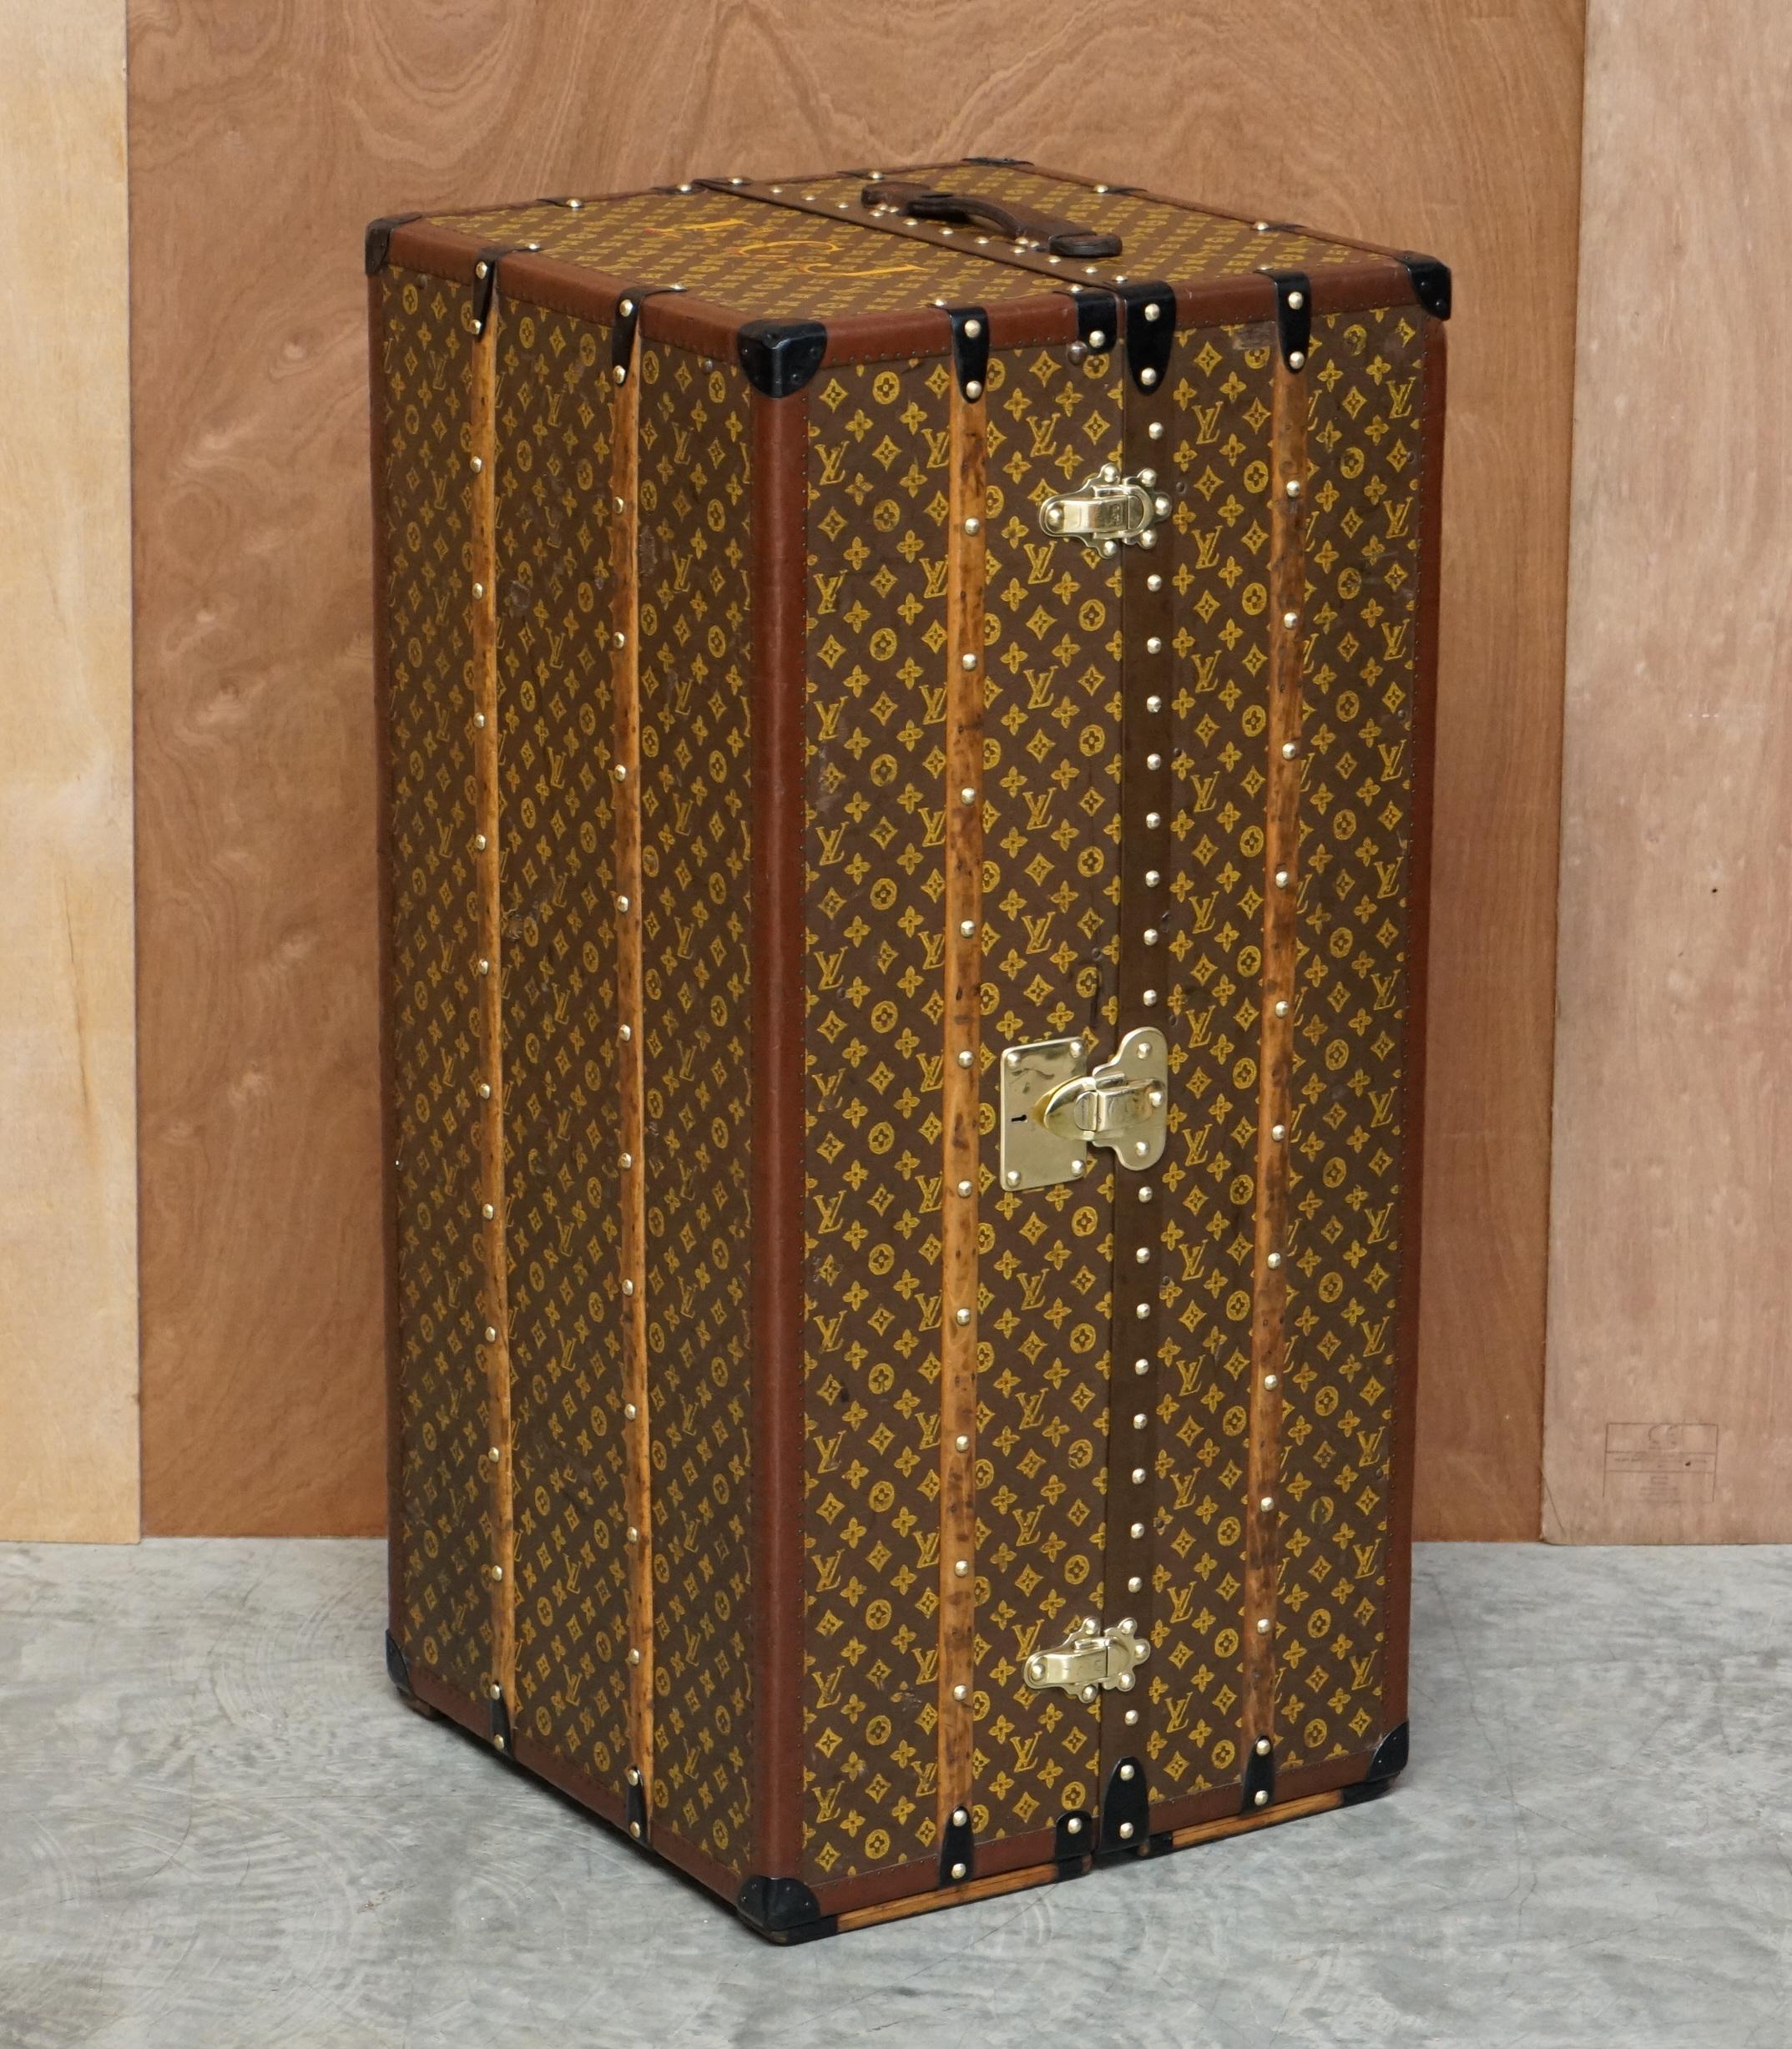 Royal House Antiques

Royal House Antiques is delighted to offer for sale this absolutely stunning fully restored original Louis Vuitton 1920 steamer wardrobe trunk originally owned by Major VH Jones later Col Victor Jones 14th King